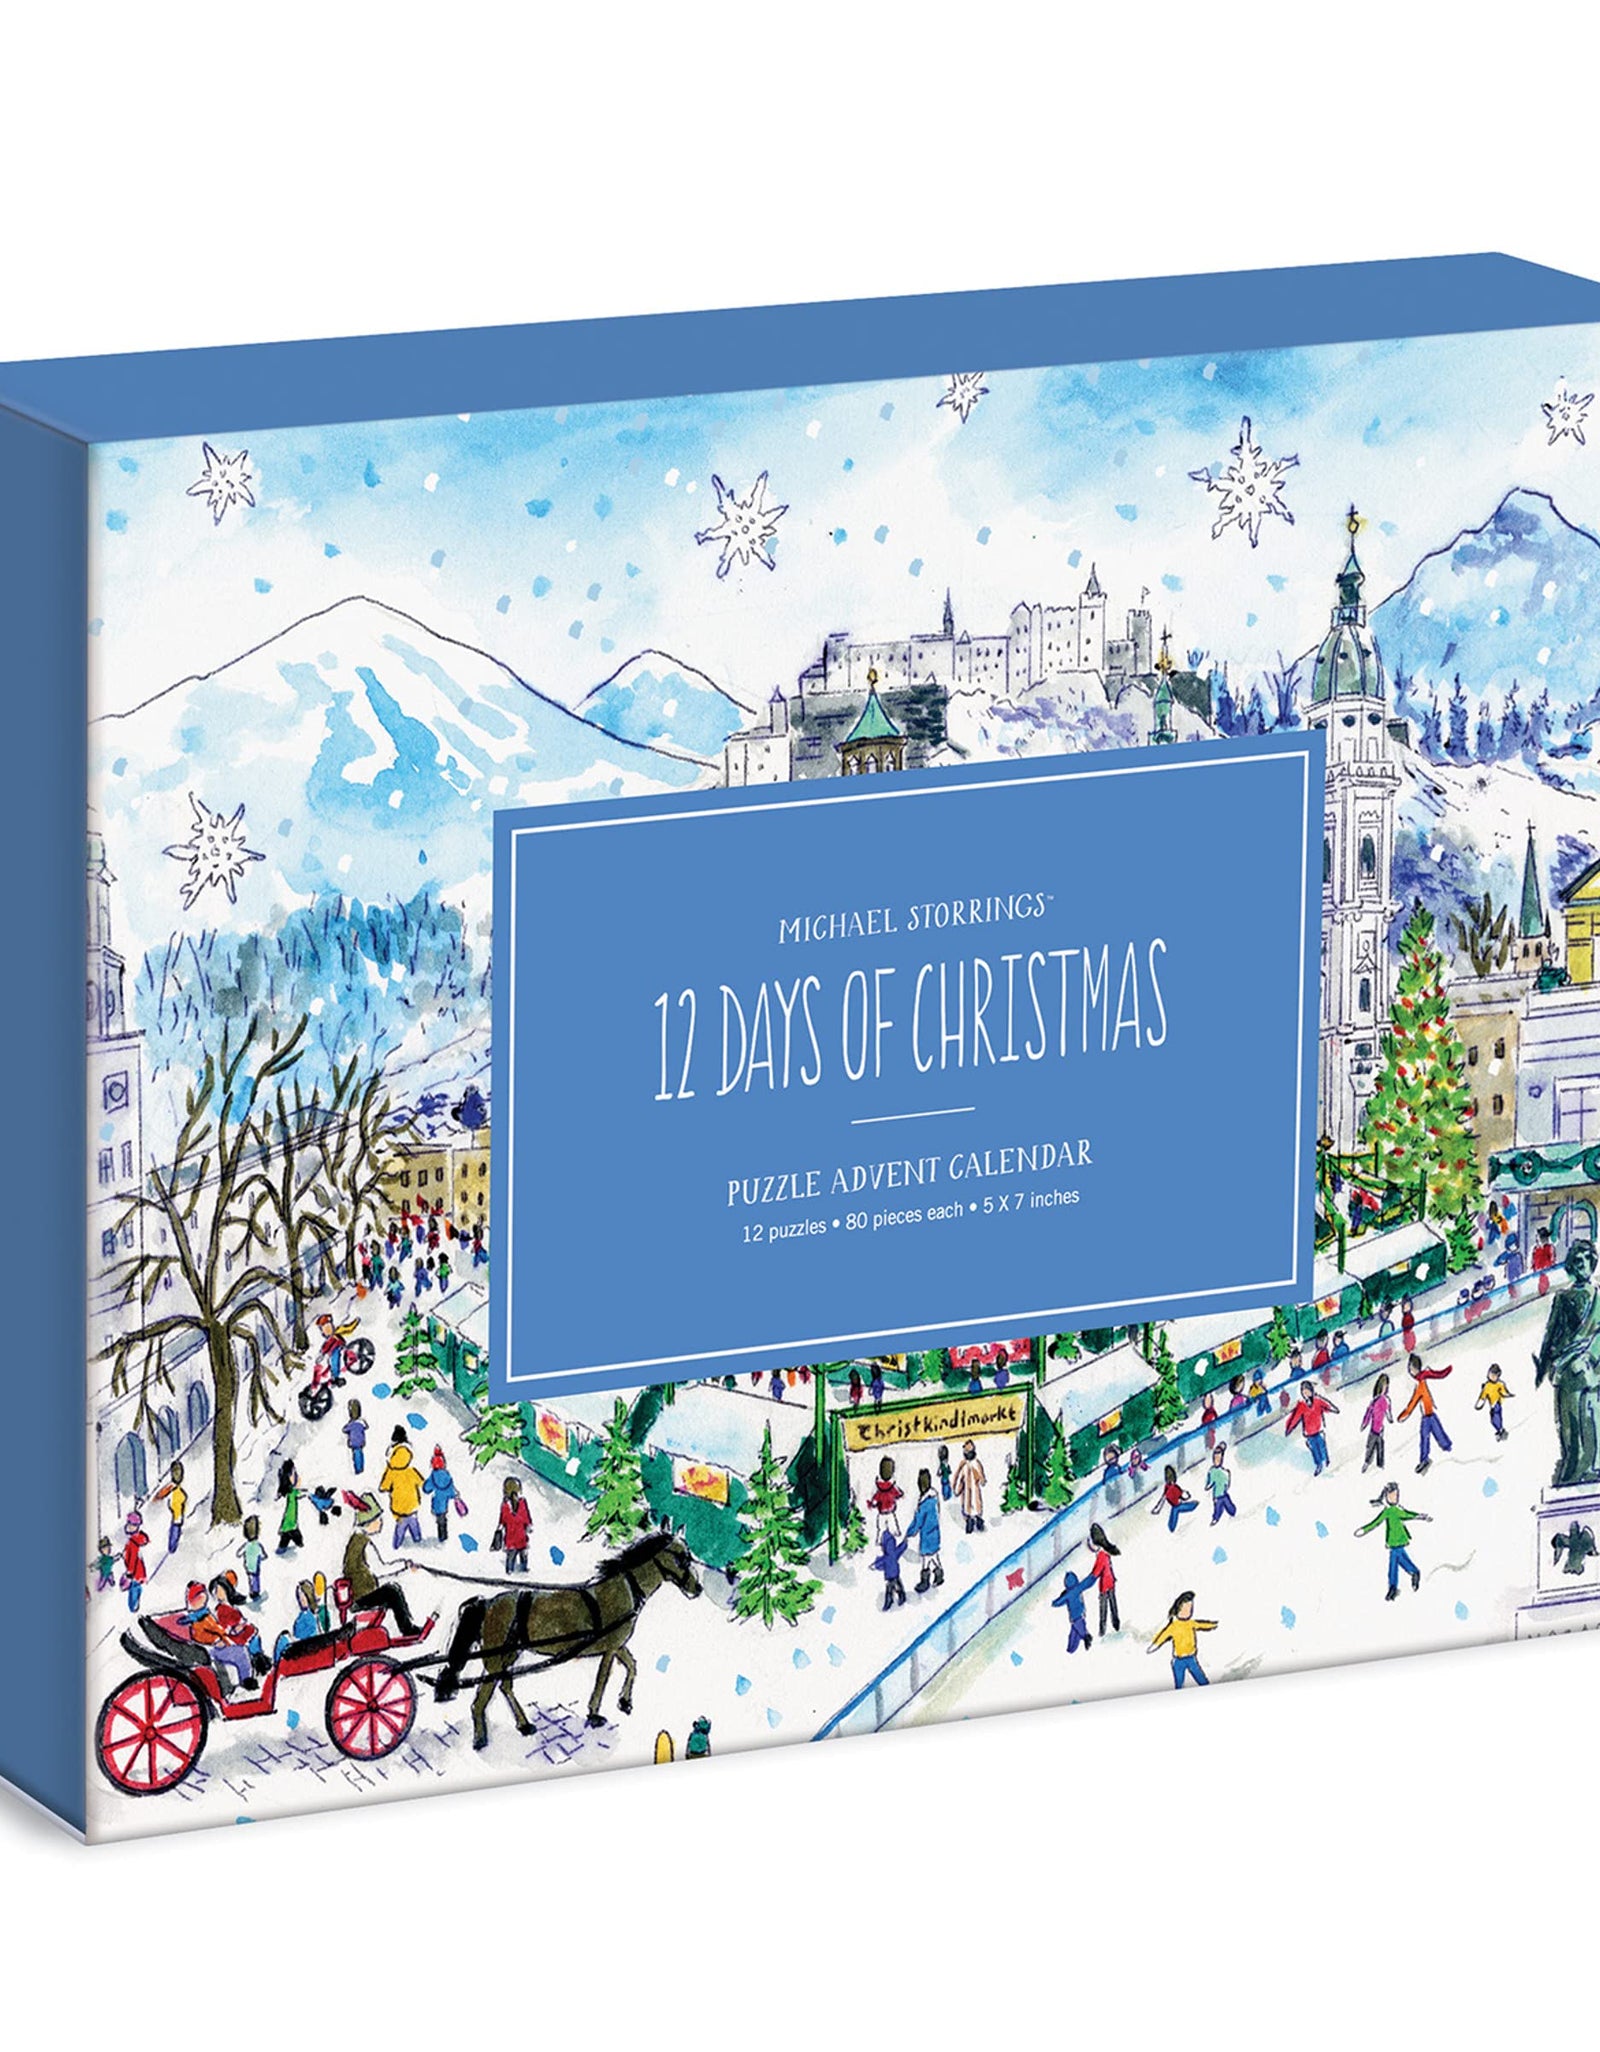 Michael Storrings 12 Days of Christmas Advent Calendar Puzzle, Includes 12 80-Piece Puzzles, 5” x 7” Each – Unique Holiday Jigsaw Puzzle Set with Thick, Sturdy Pieces